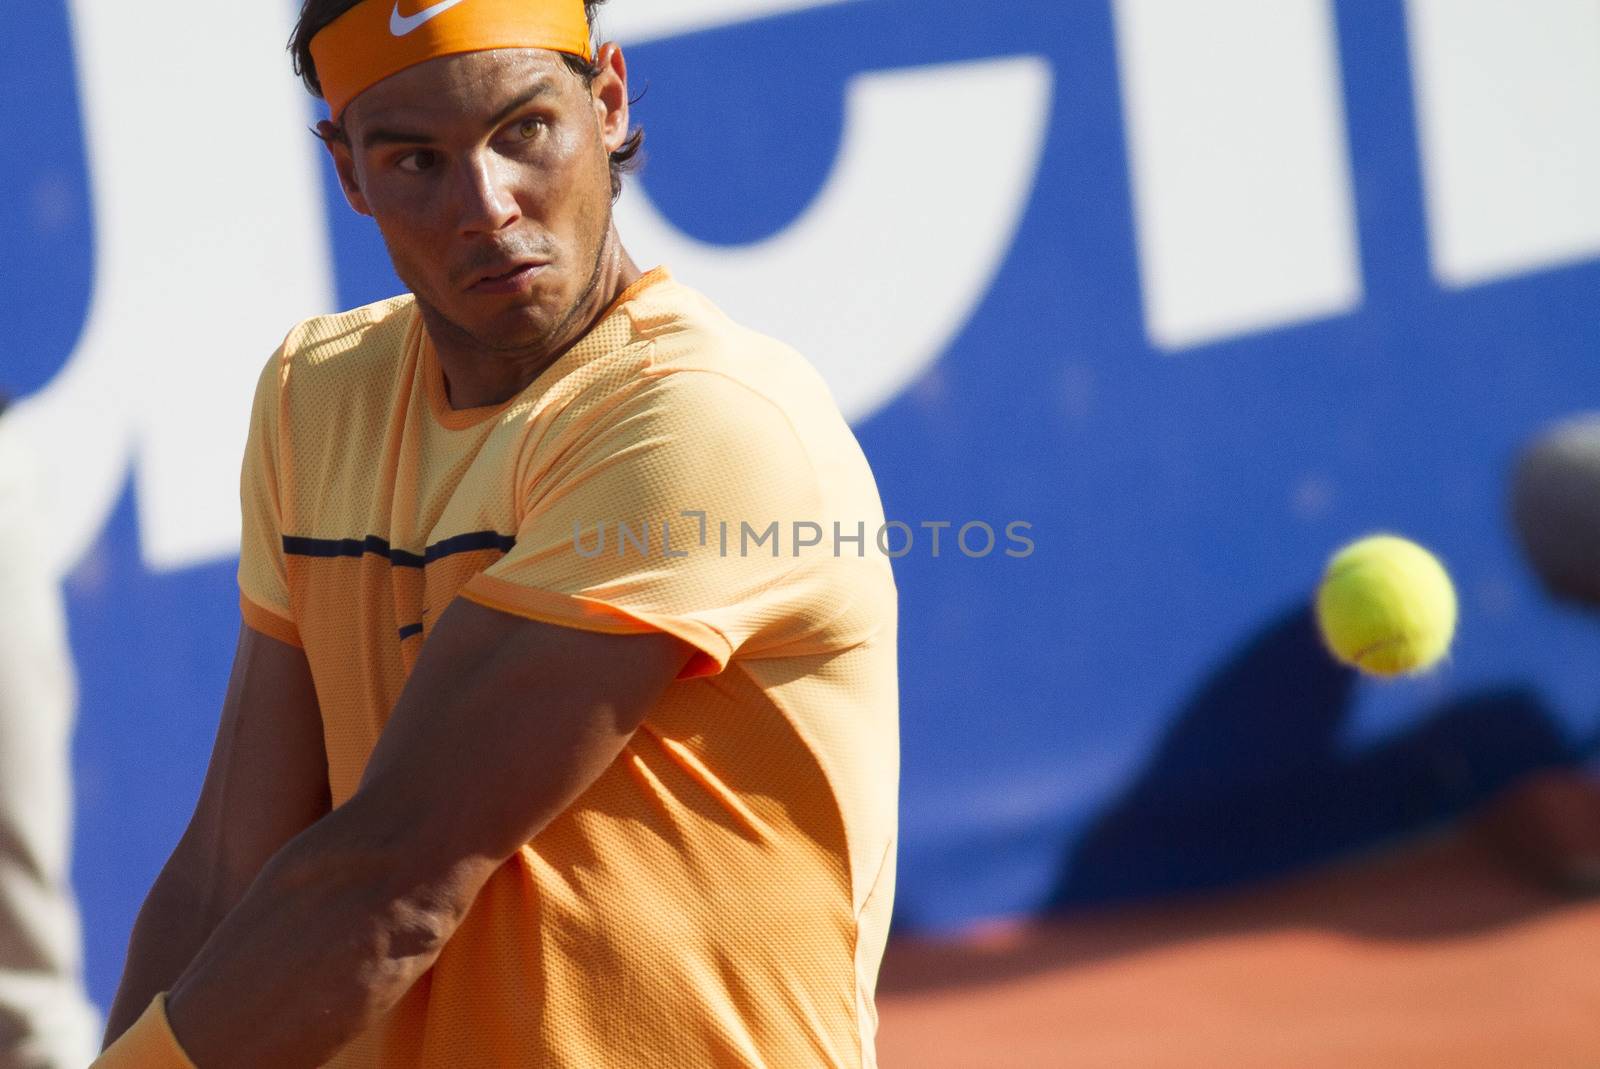 SPAIN, Barcelona: Spanish tennis player Rafael Nadal returns the ball to Japanese tennis player Kei Nishikori during the final of the ATP Barcelona Open Conde de Godo tennis tournament in Barcelona on April 24, 2015. Rafael Nadal equalled Argentine legend Guillermo Vilas's record of 49 clay-court titles with his ninth Barcelona Open after overcoming defending champion Kei Nishikori 6-4, 7-5 today. 